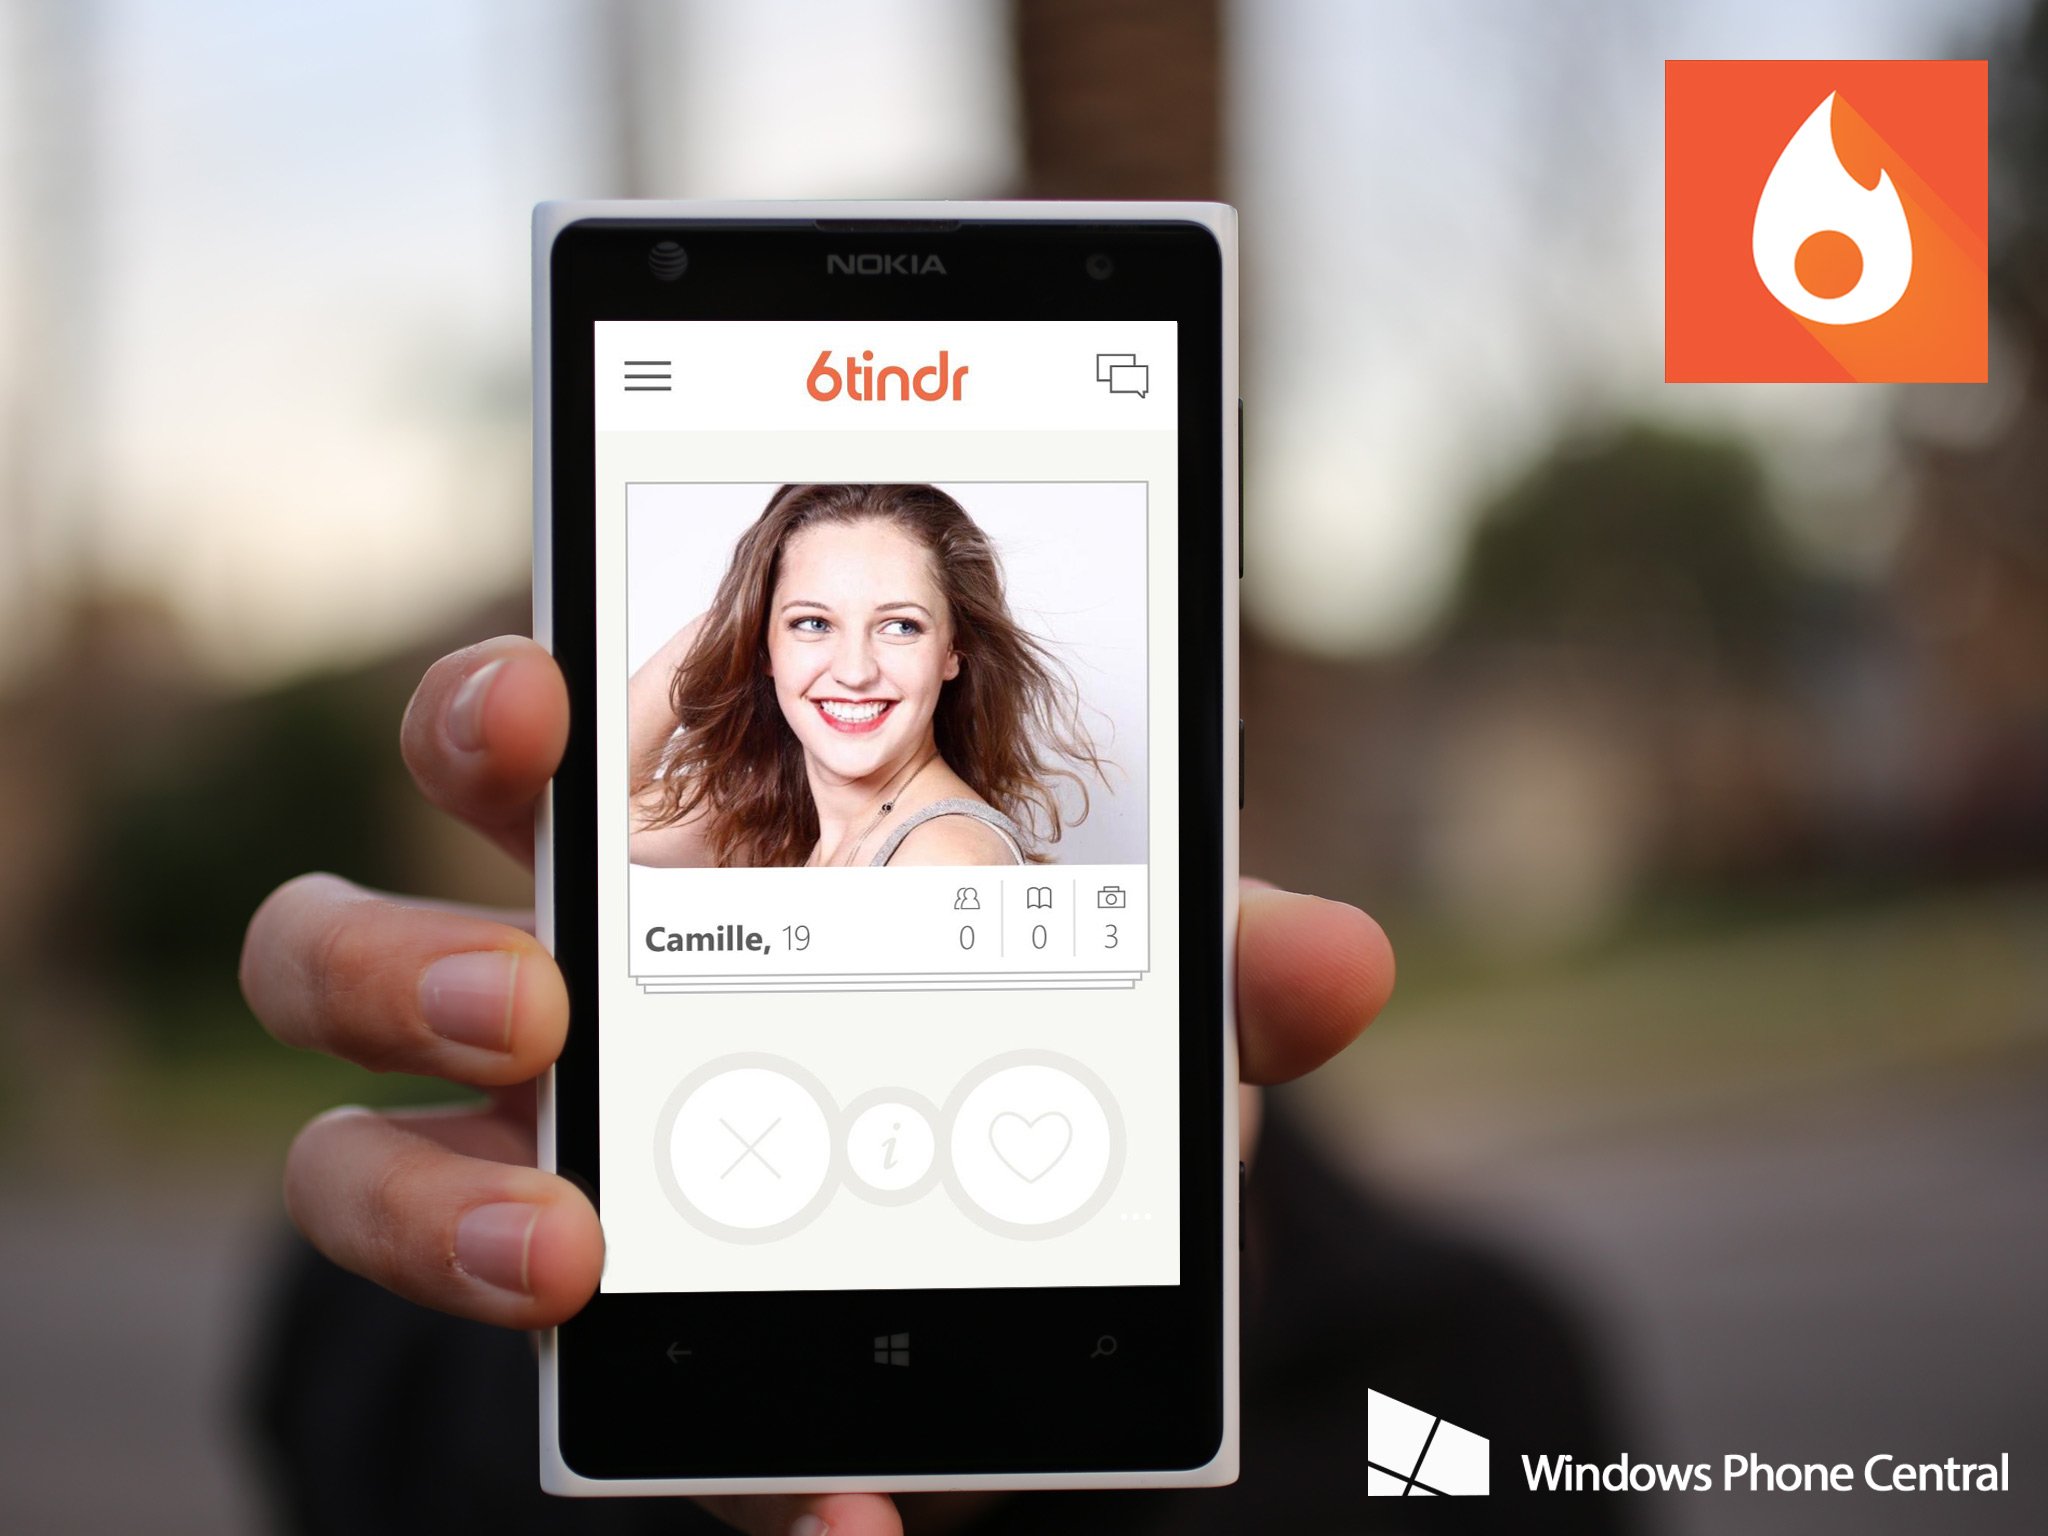 Windows for phone app tinder Rudy working